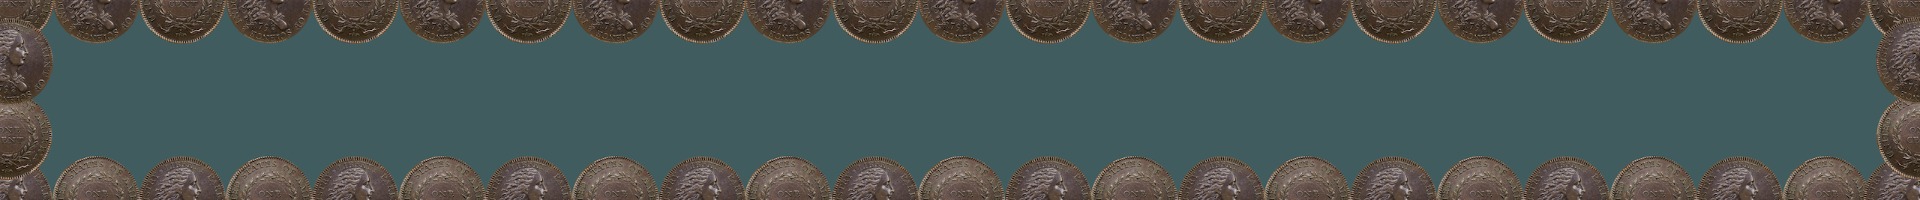 Early American Coinage